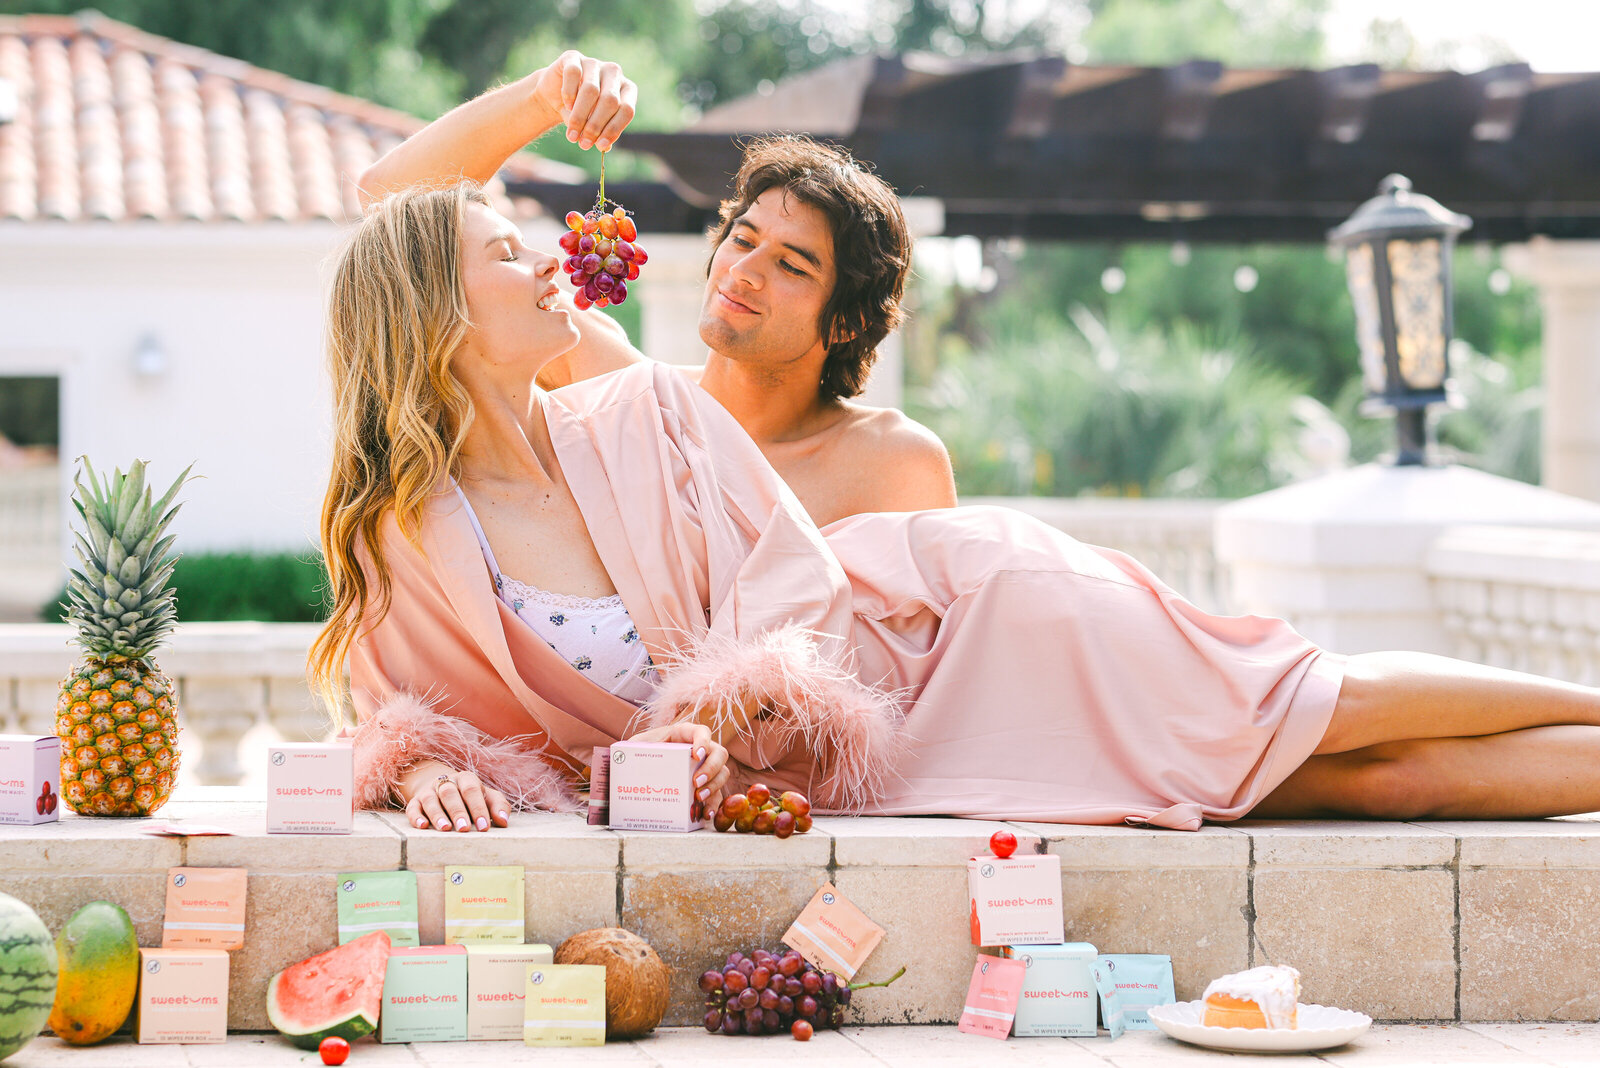 Model feeding grapes on bed grecian inspired lifestyle product photoshoot san diego commercial photographer